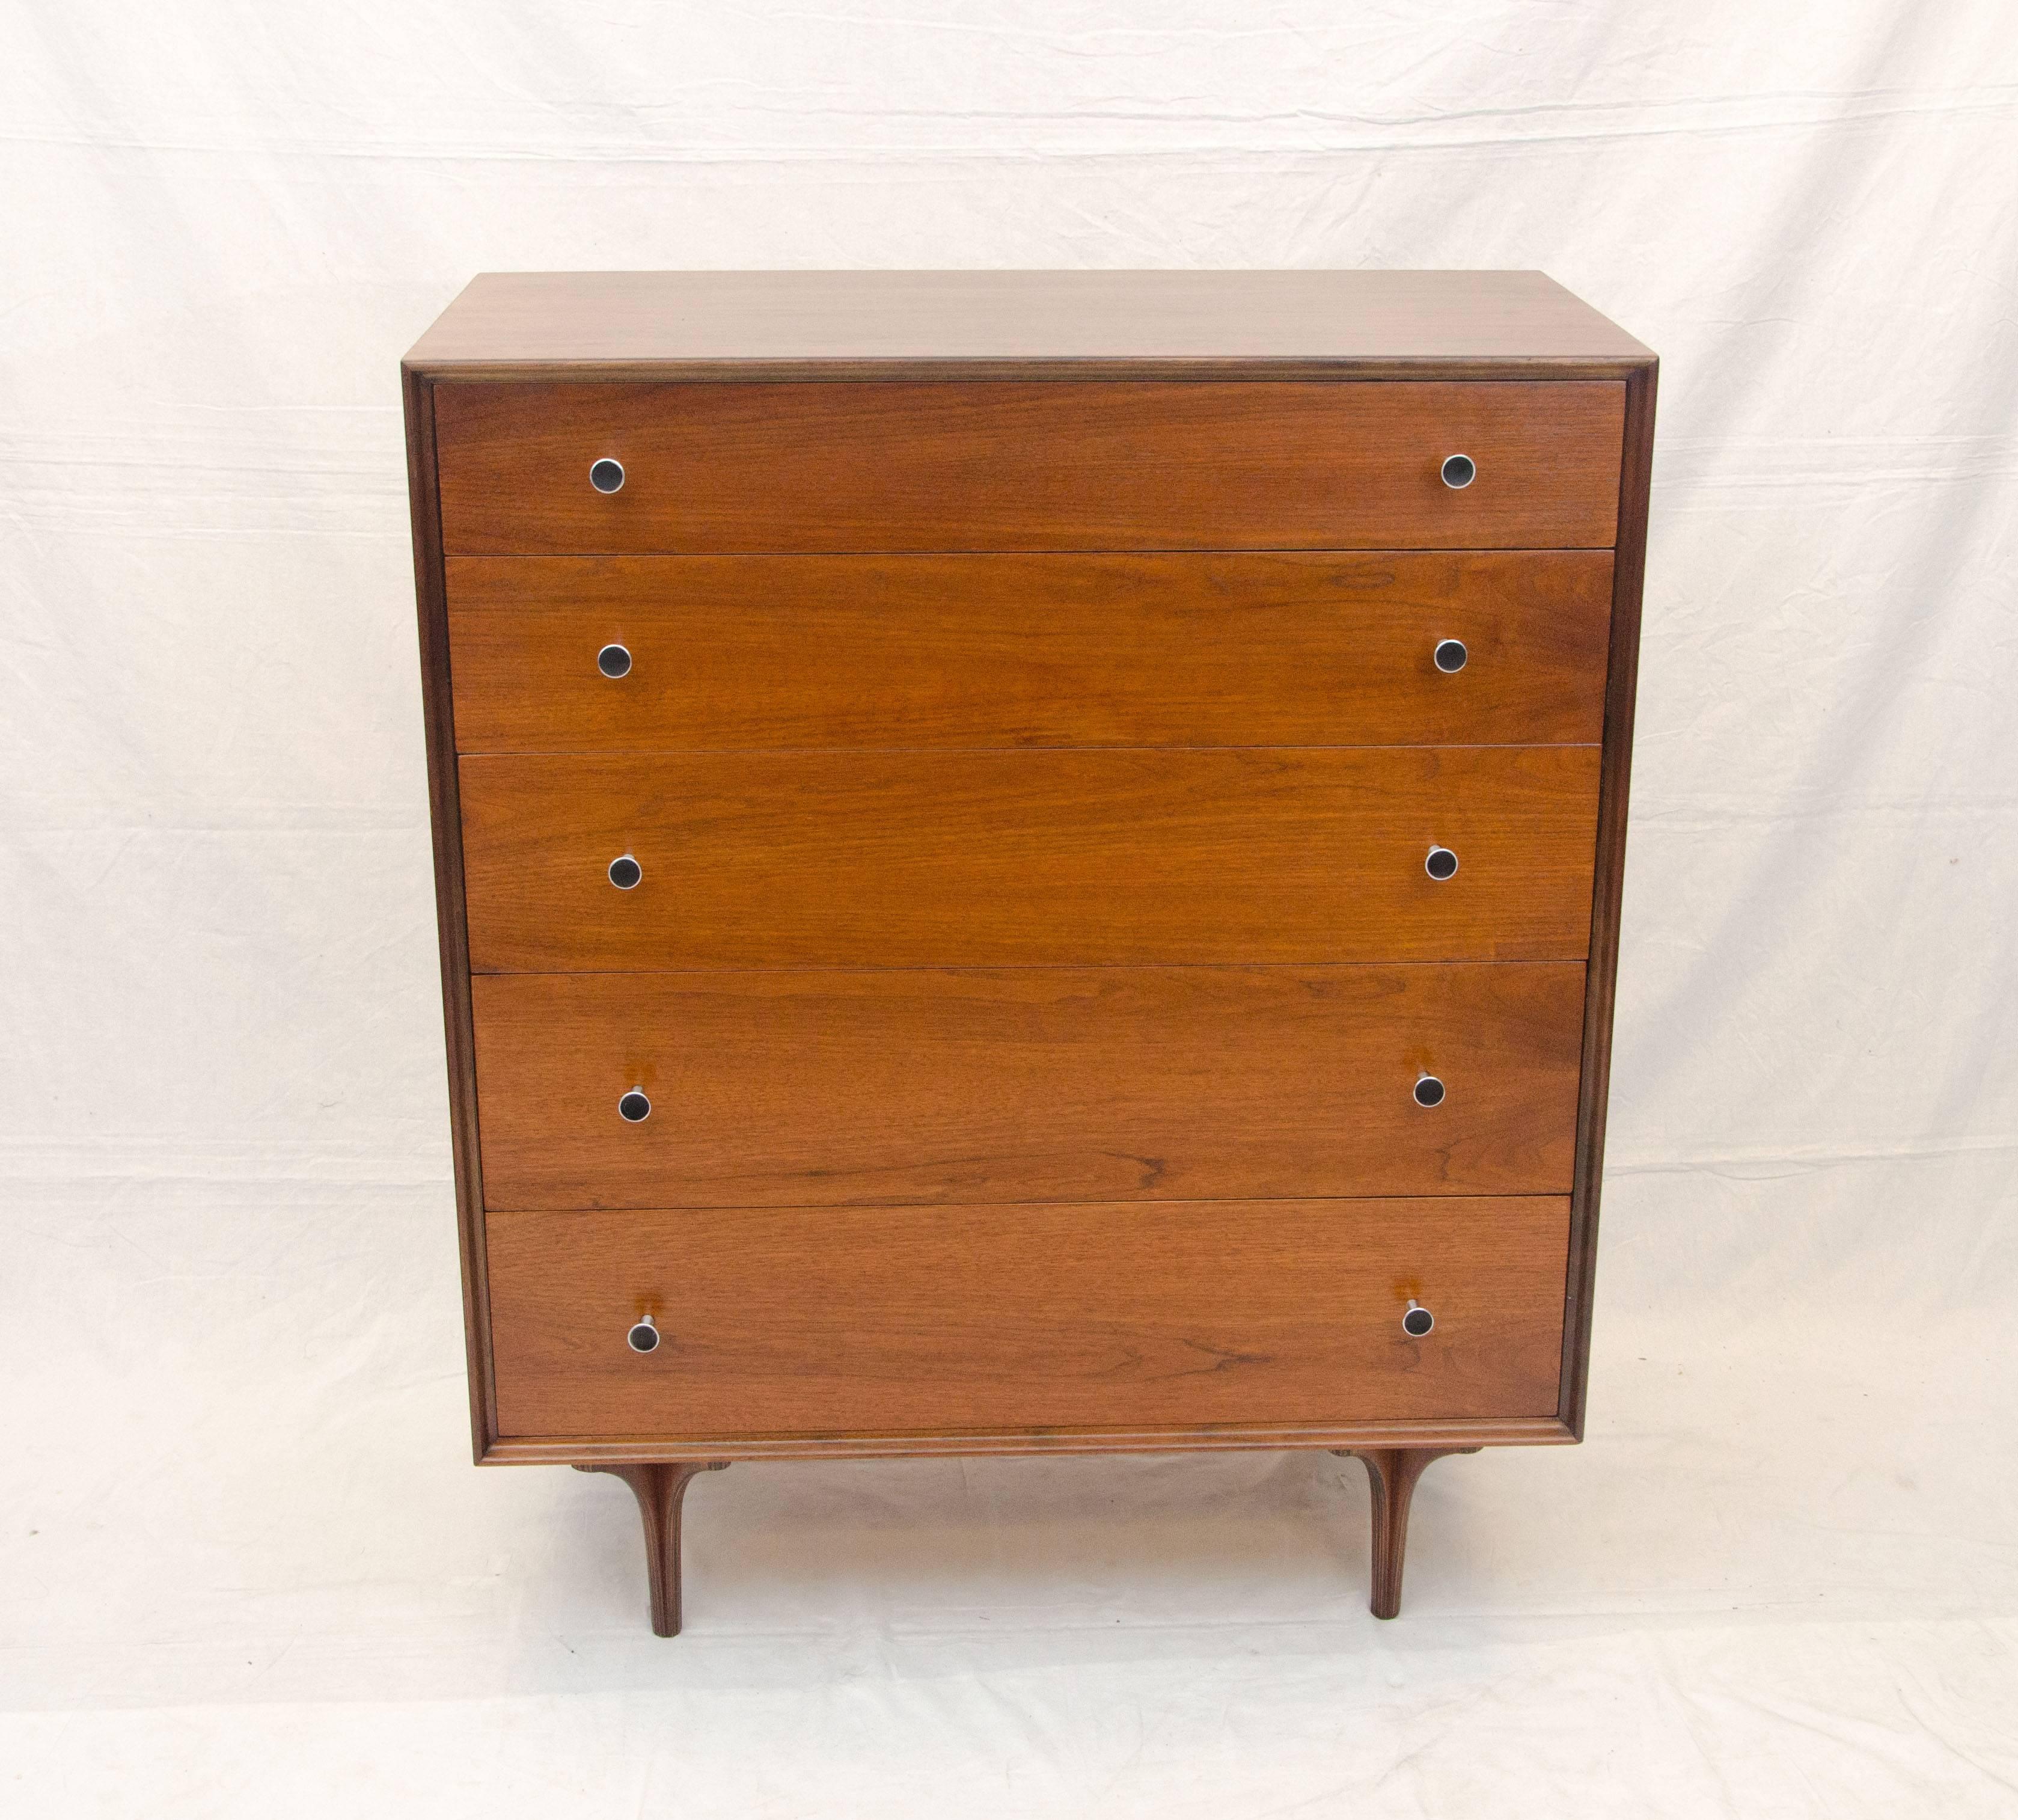  Very nice five drawer walnut chest of drawers designed by Milo Baughman for Glenn of California. Dresser retains the original aluminum pulls with black accents. Drawer interior heights are graduated from 3